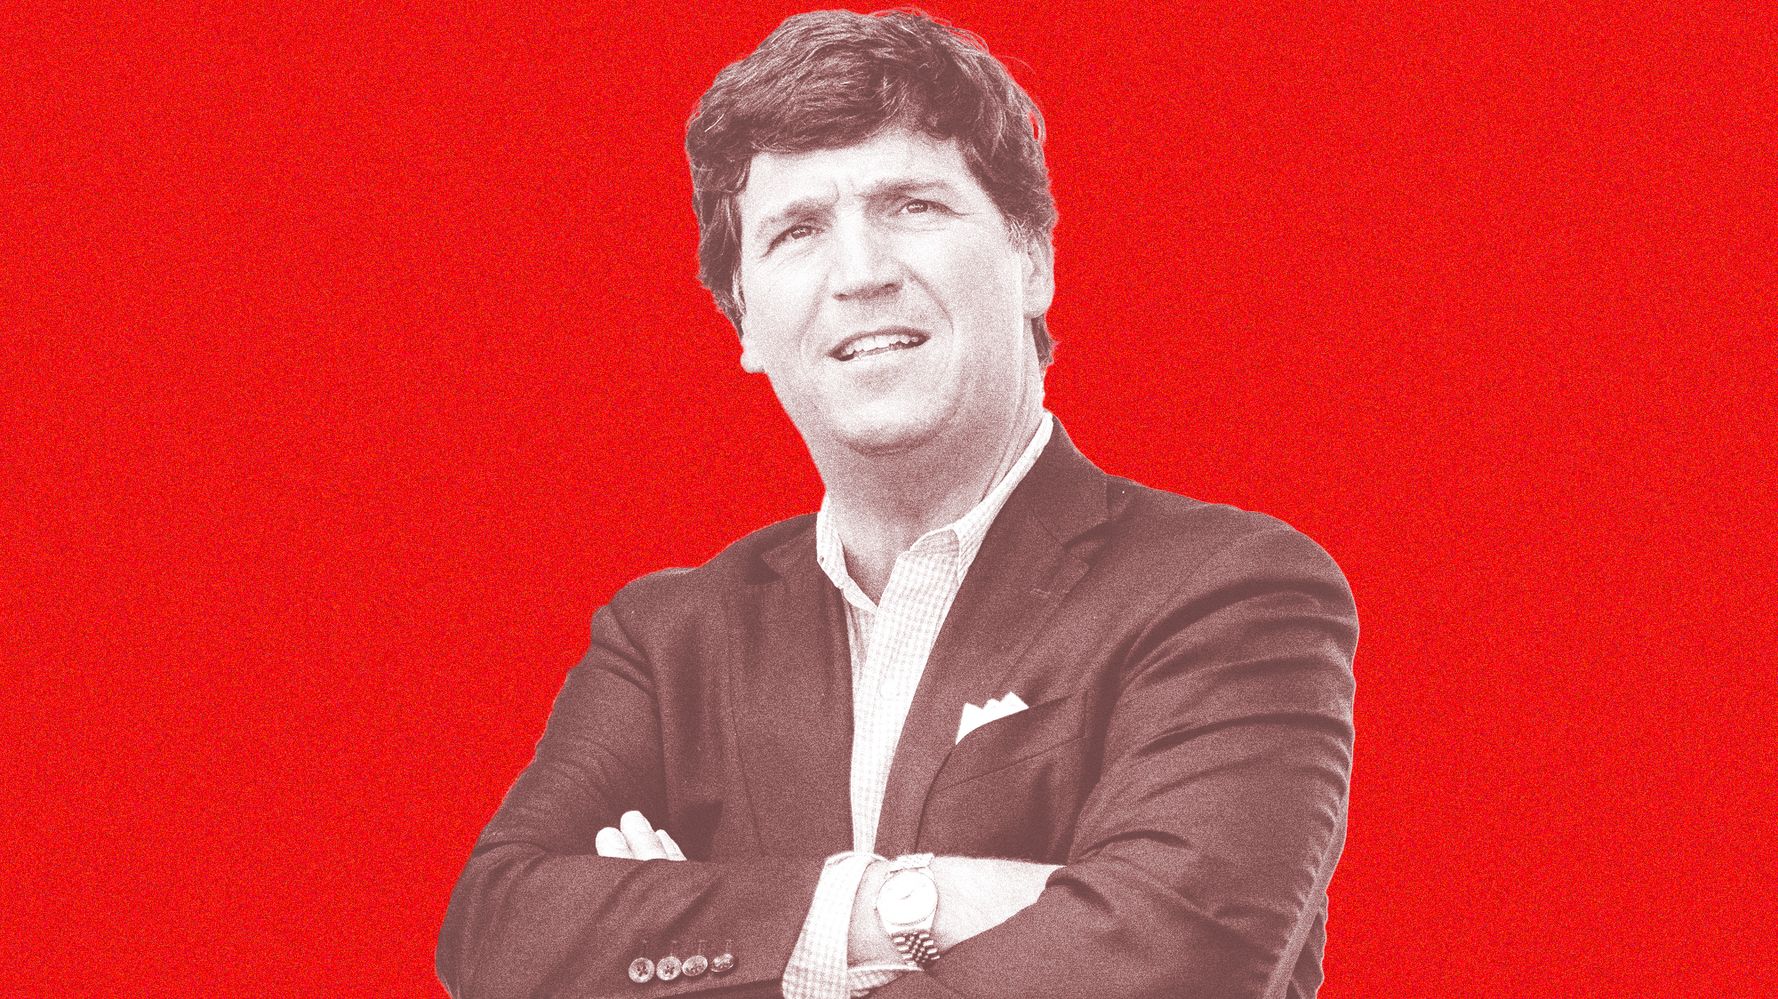 Tucker Carlson’s new racist lie is not really about COVID treatments